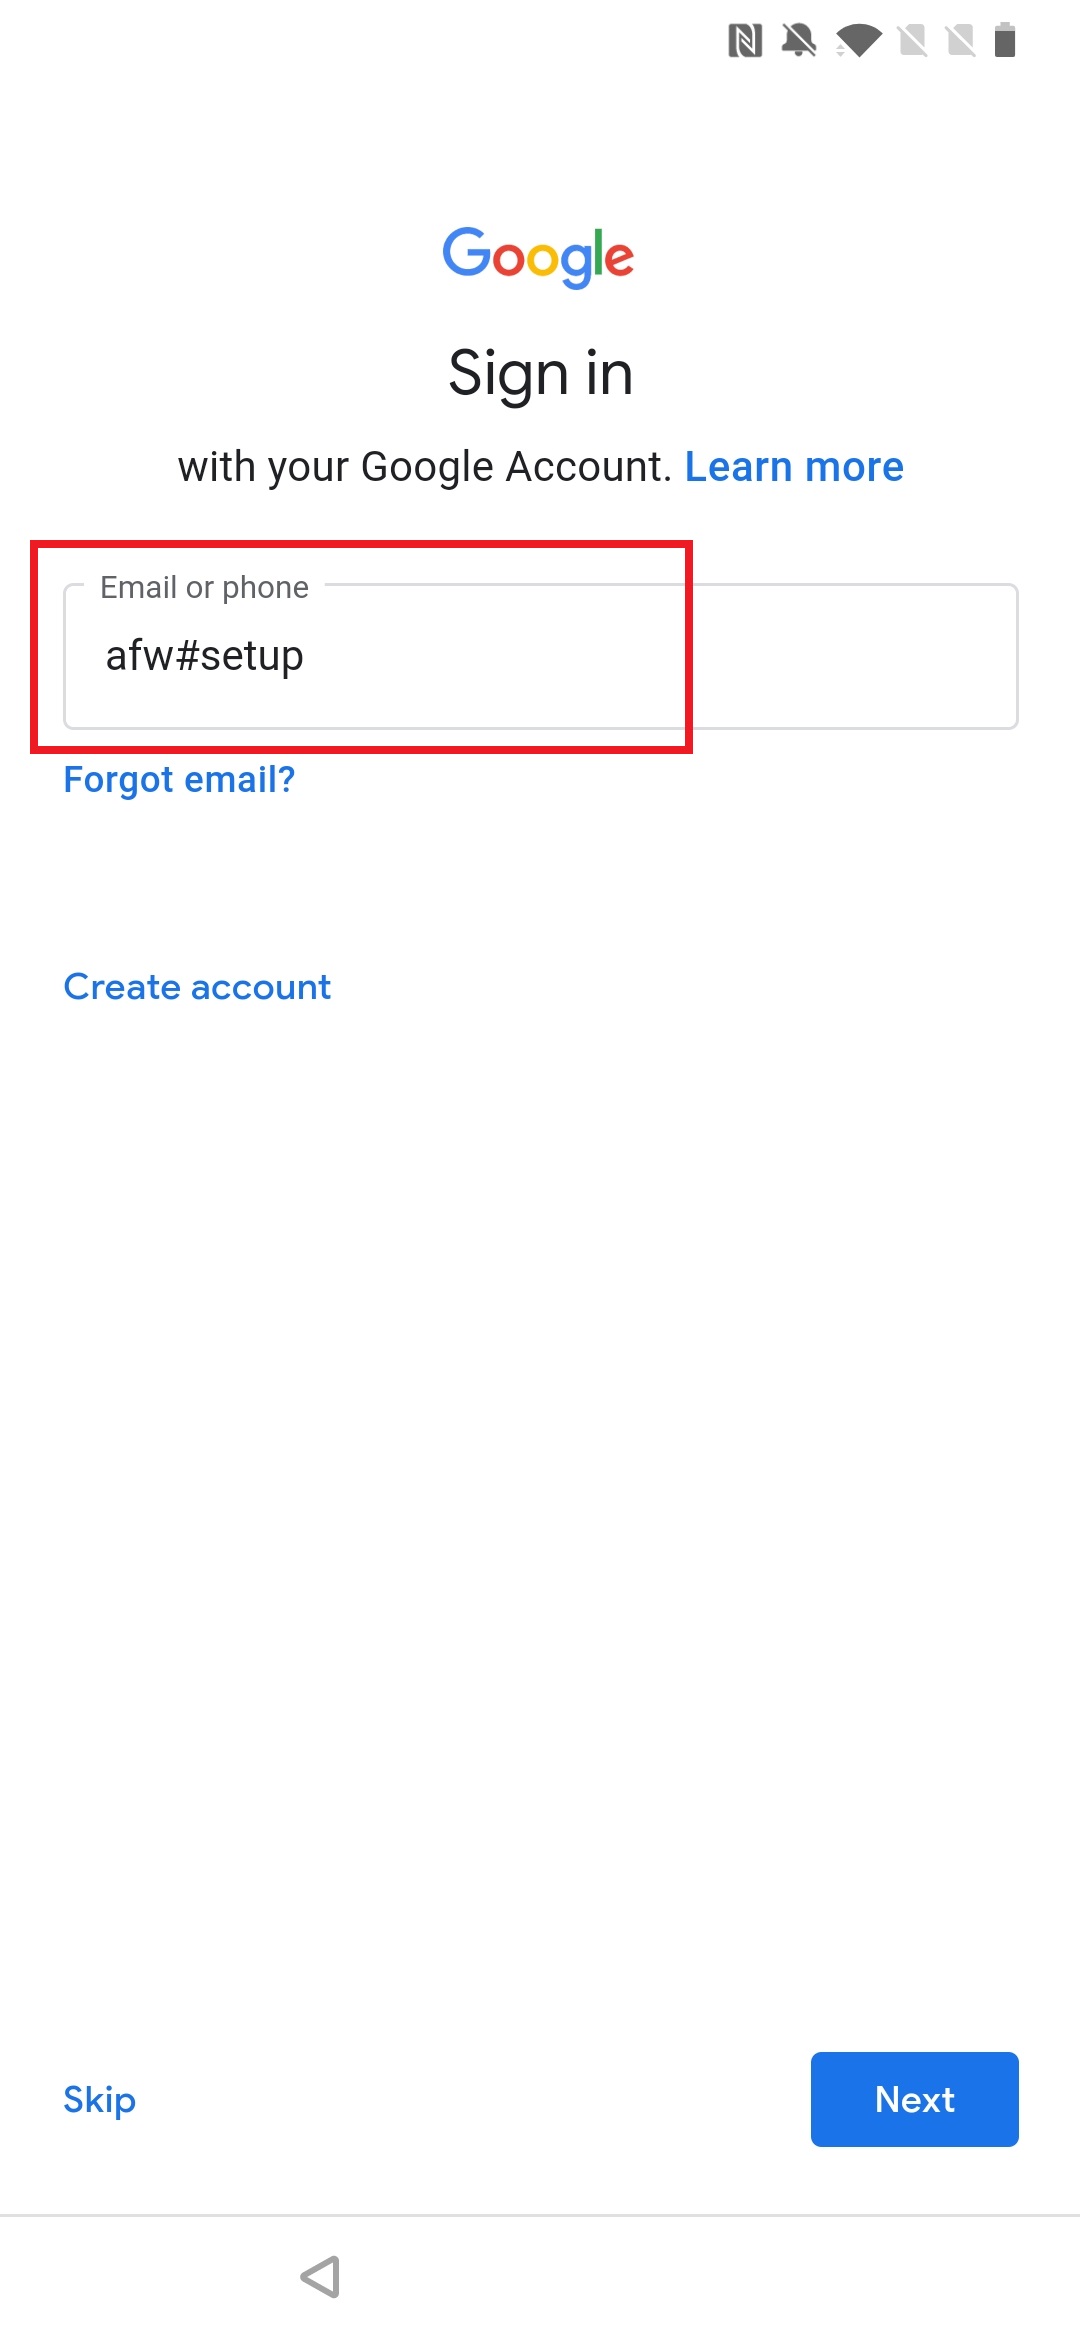 10 enter afwsetup on the Gmail sign in page